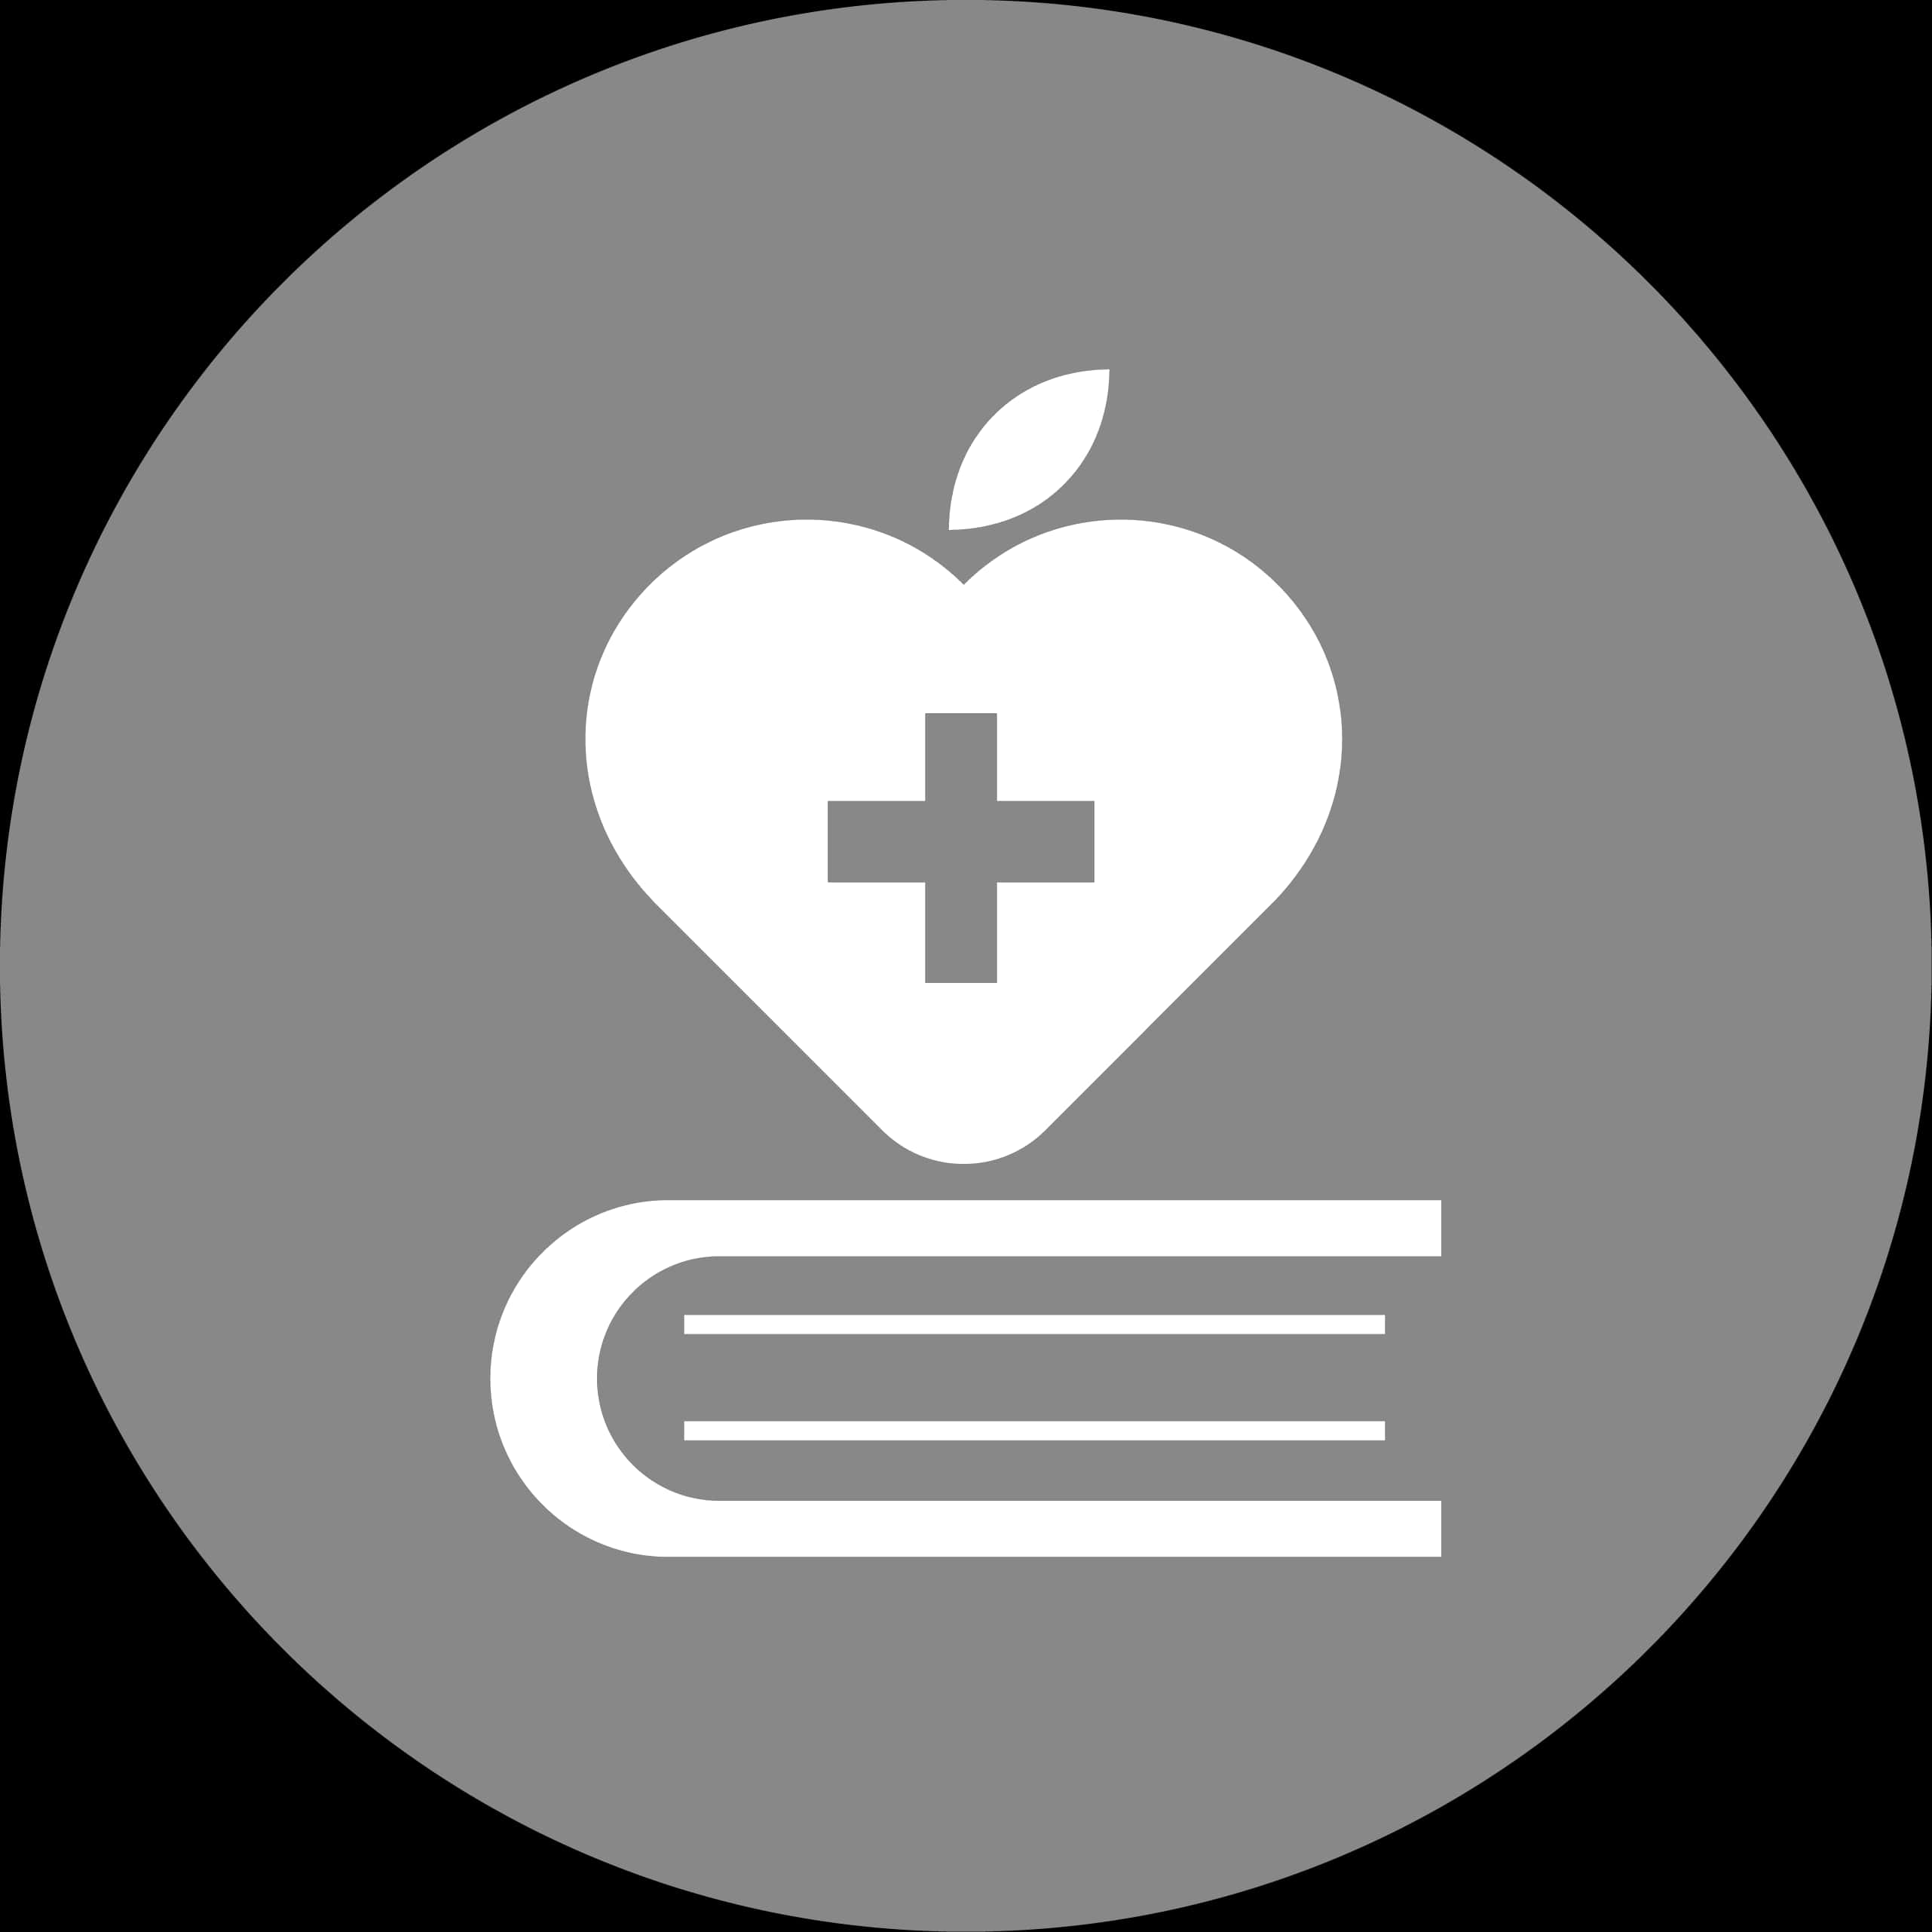 Health Education Icon PNG image